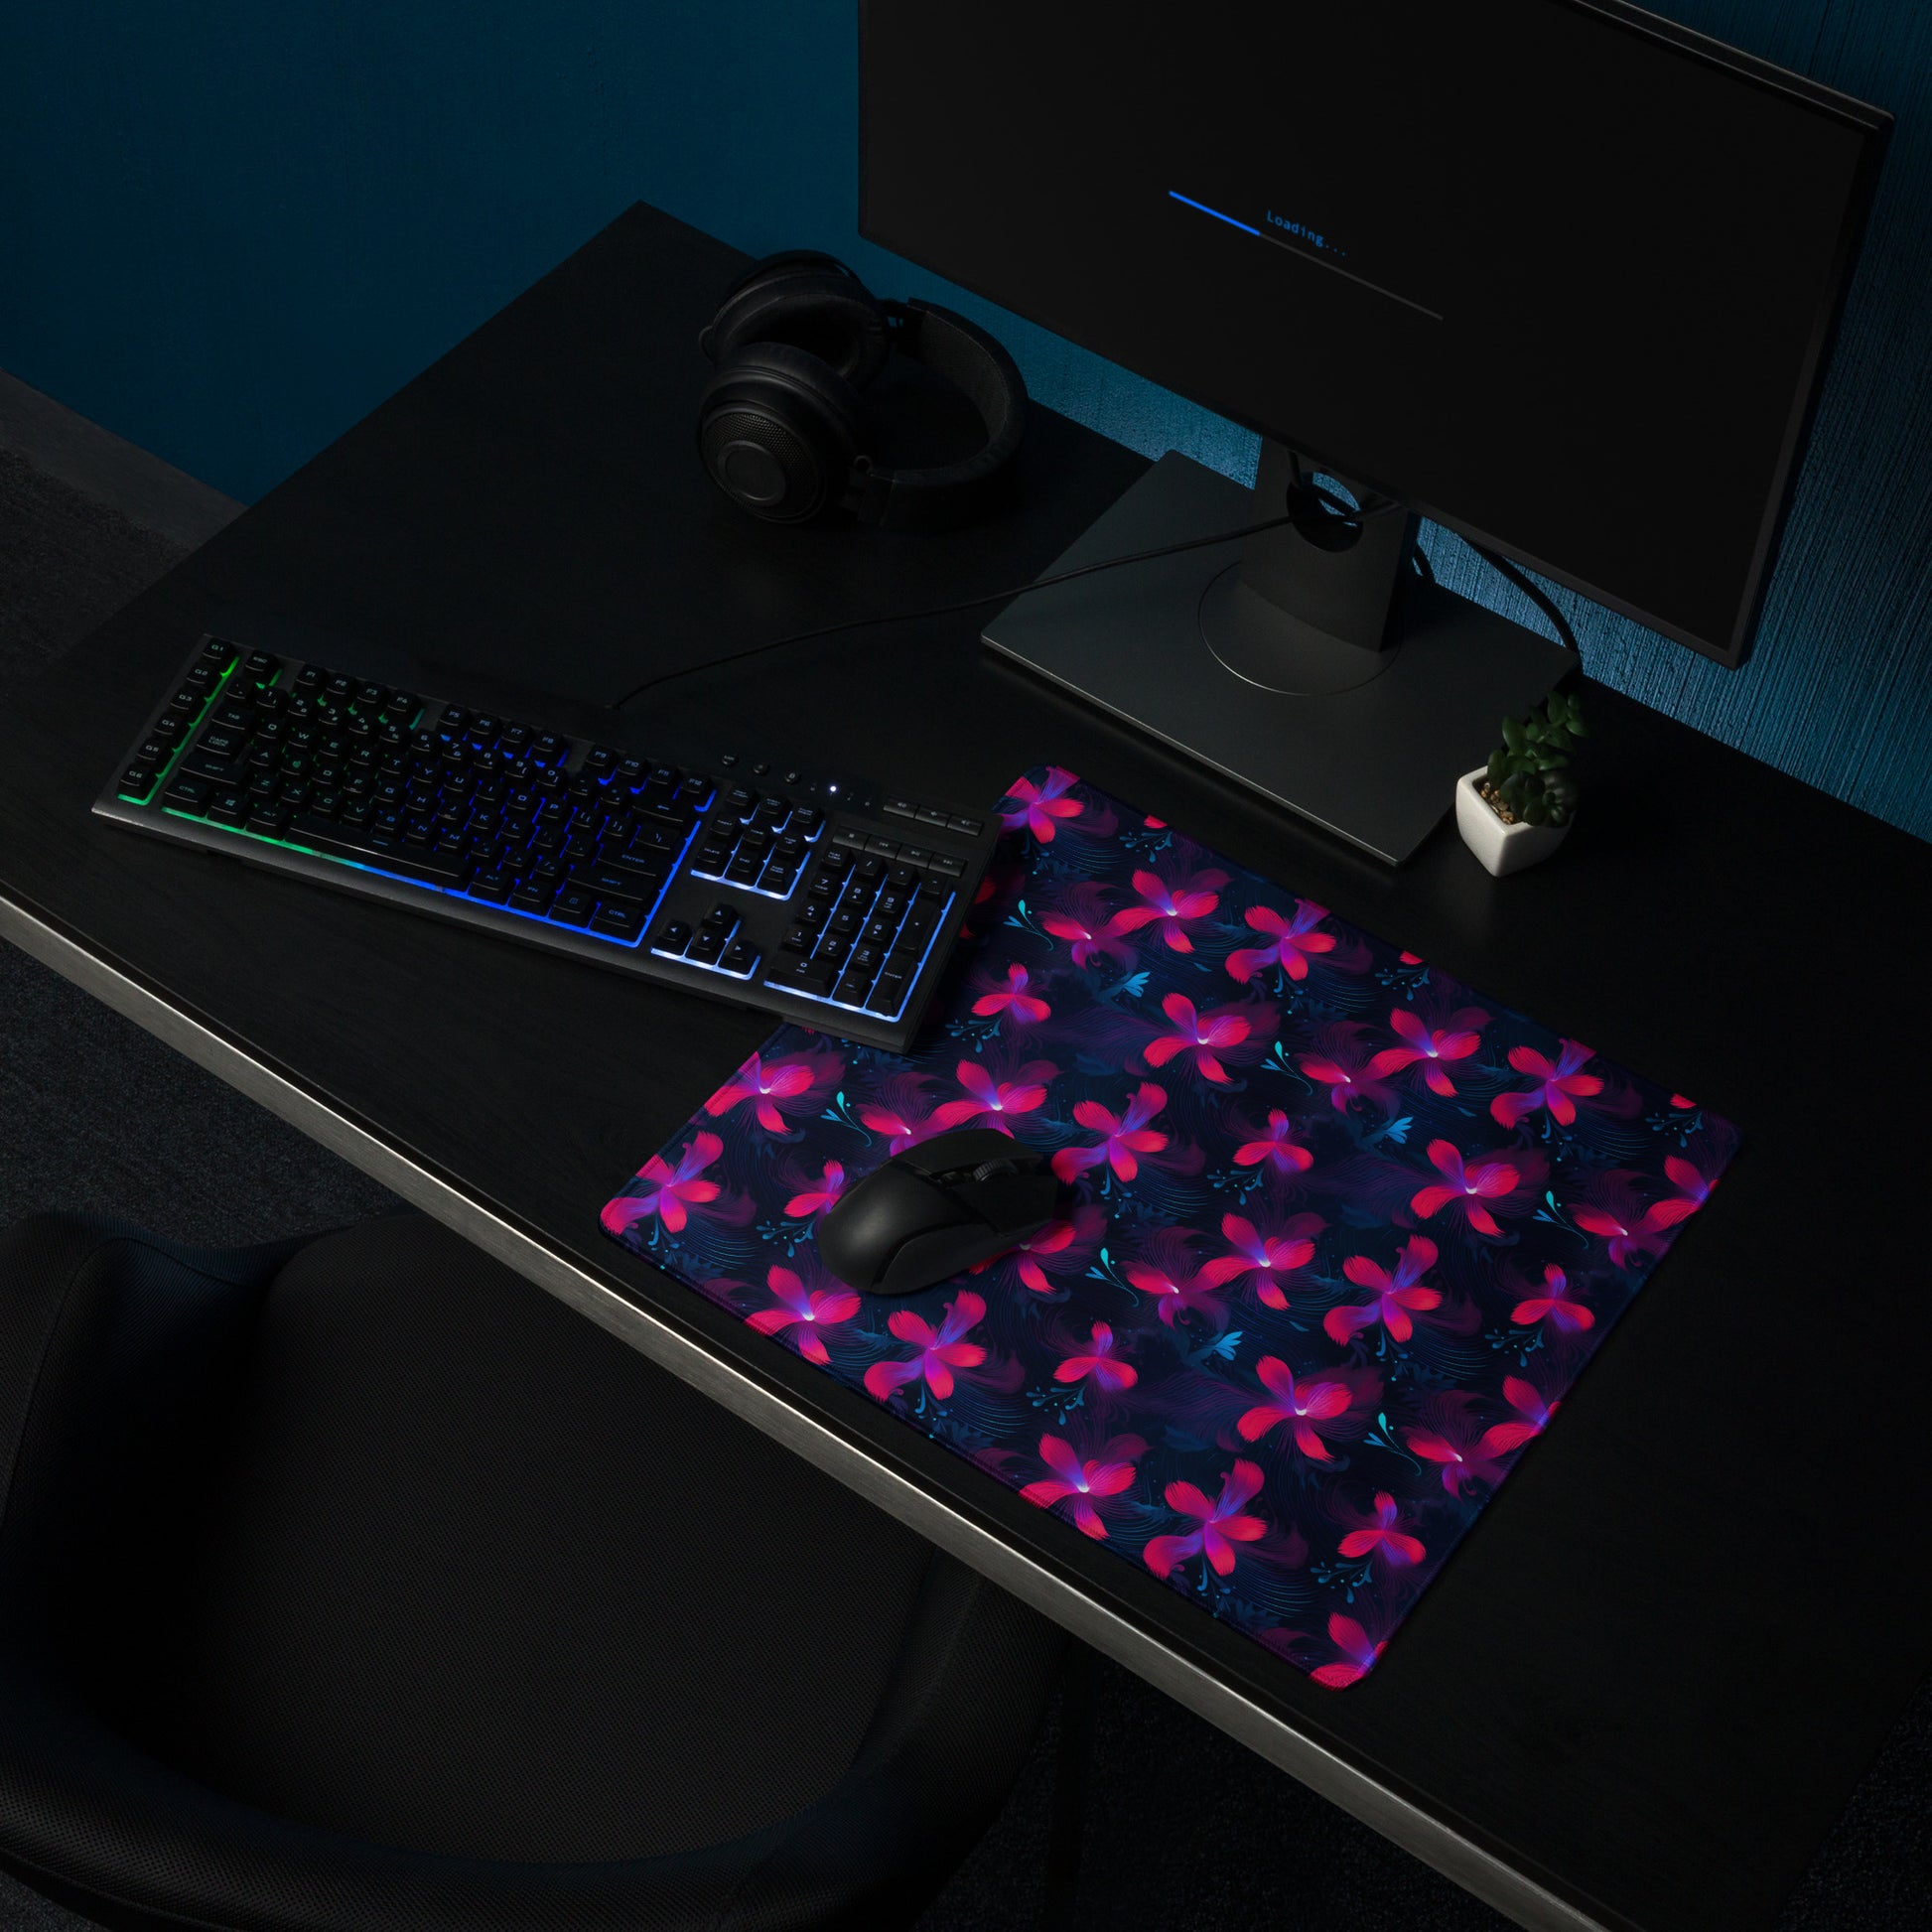 A 18" x 16" desk pad with neon pink and blue floral pattern sitting on a desk.